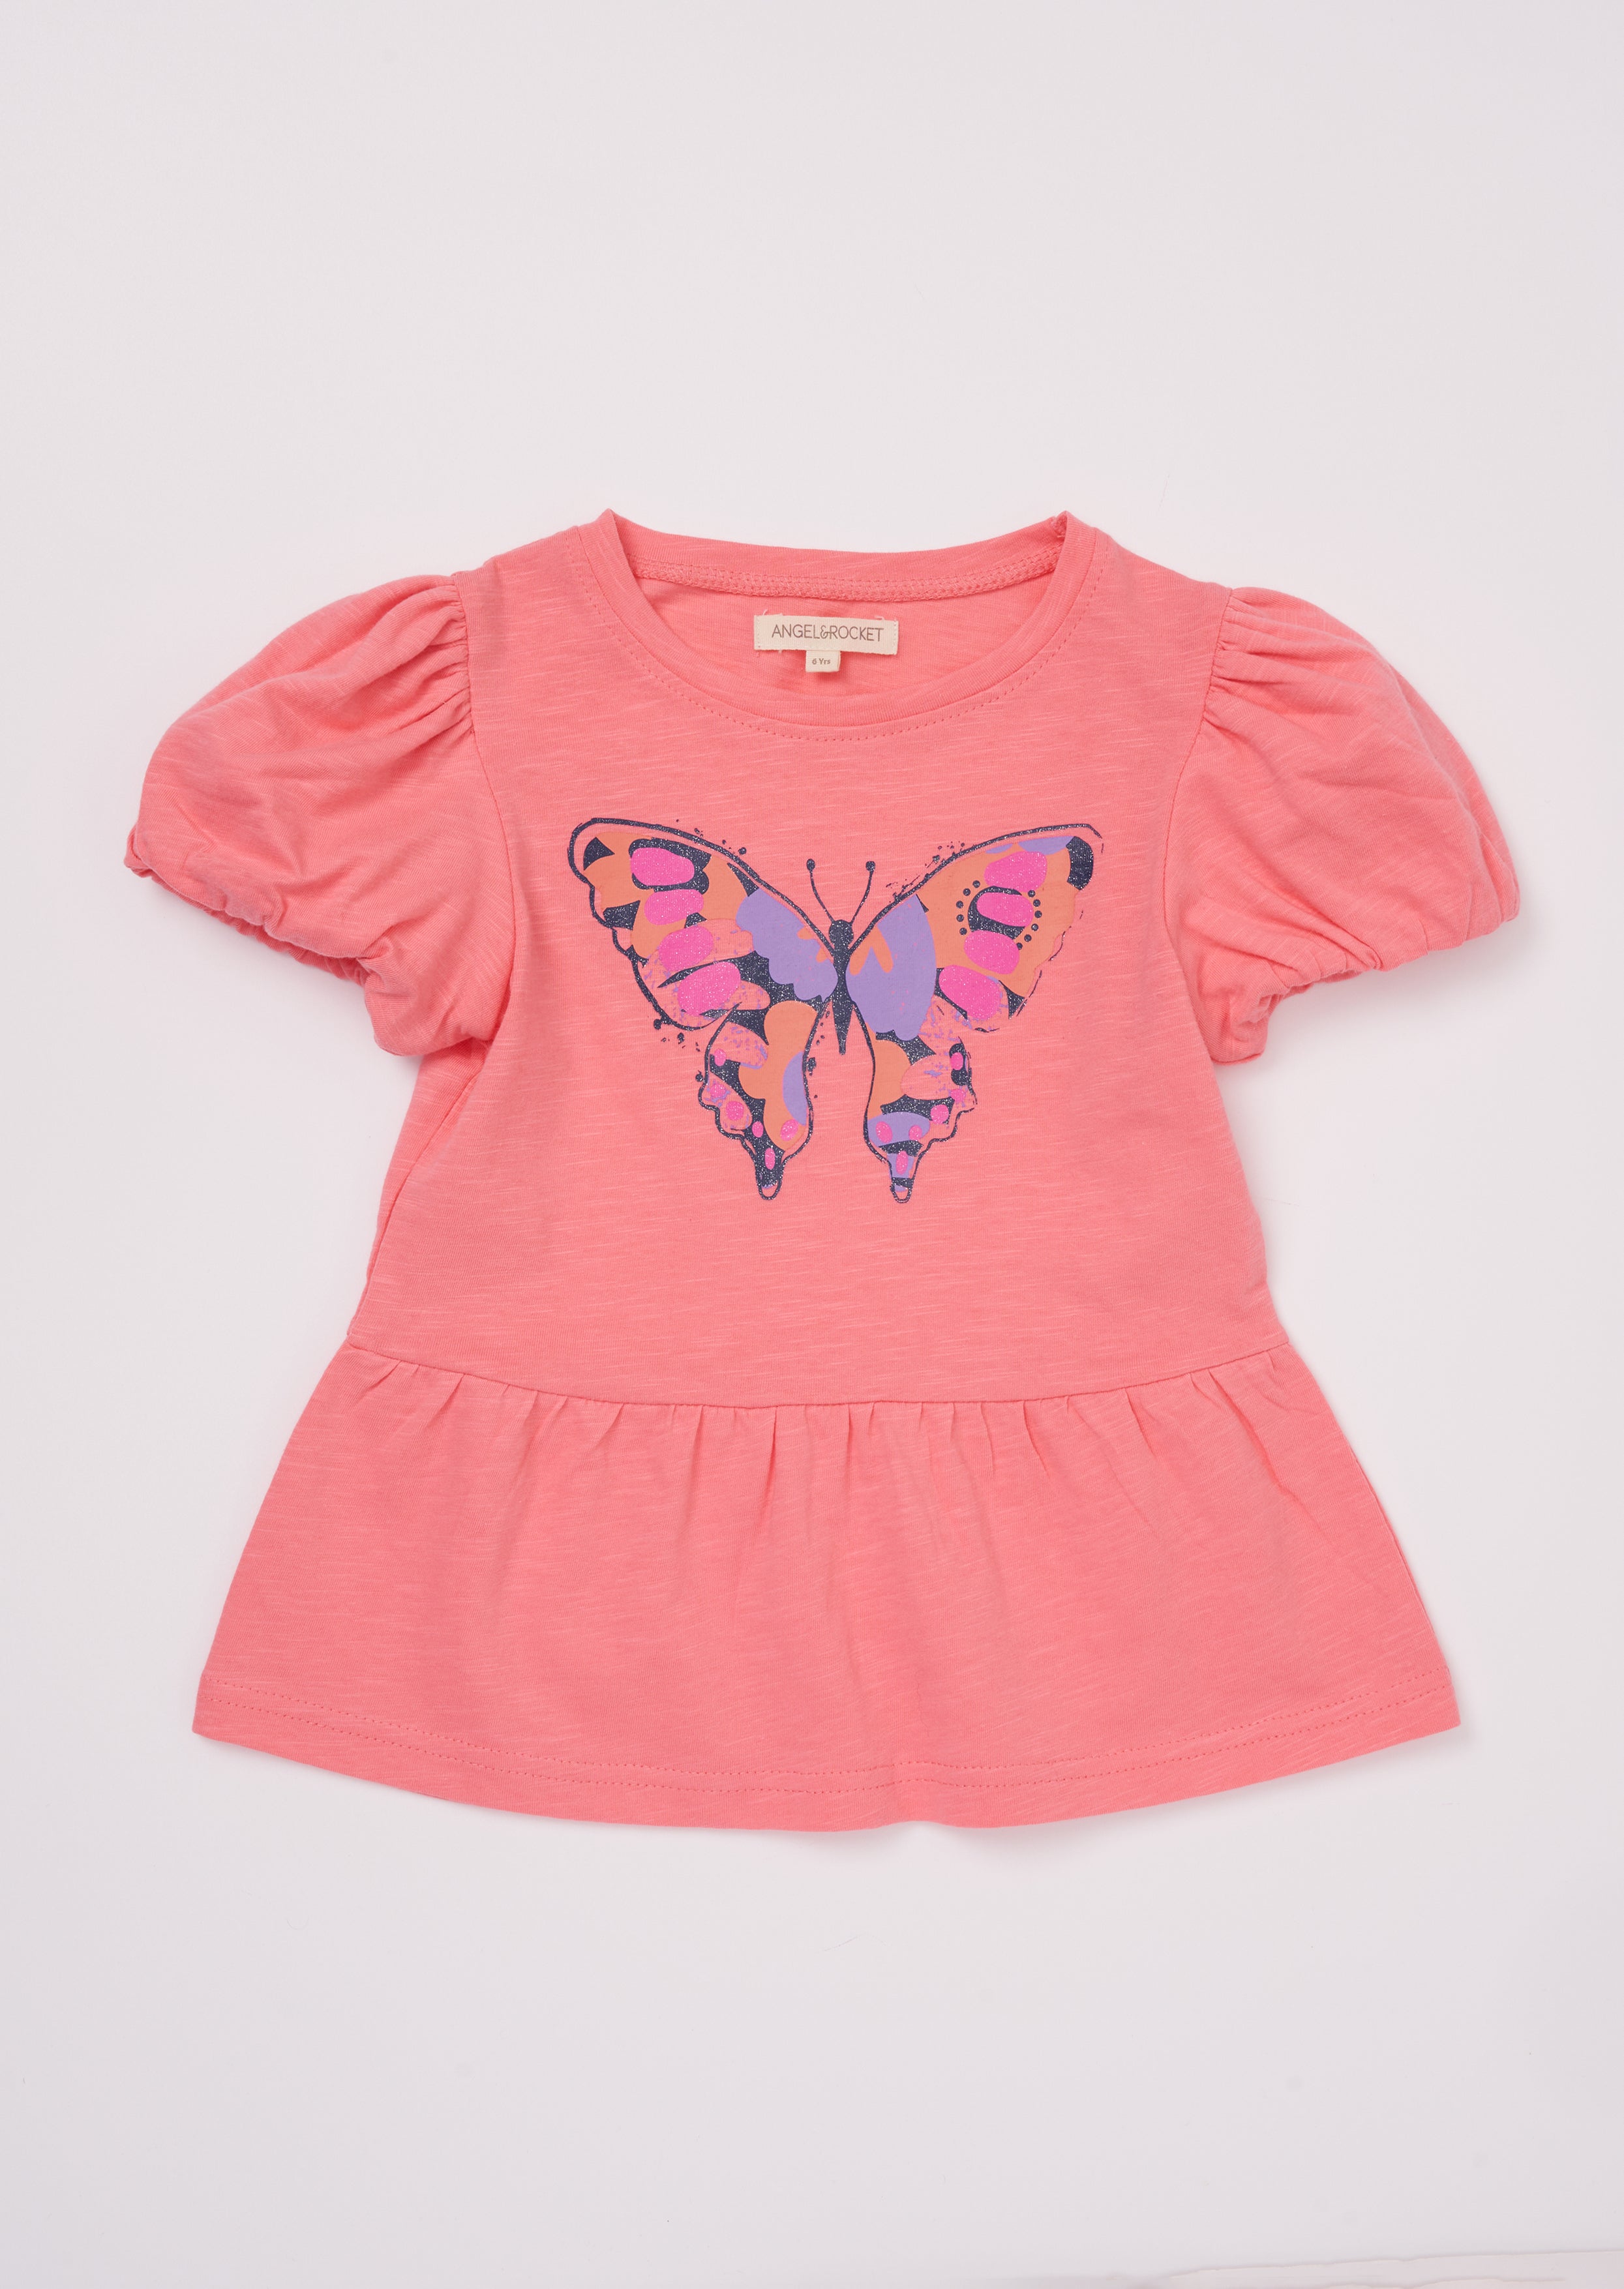 Girls Butterfly Printed Pink Top with Puff Sleeves